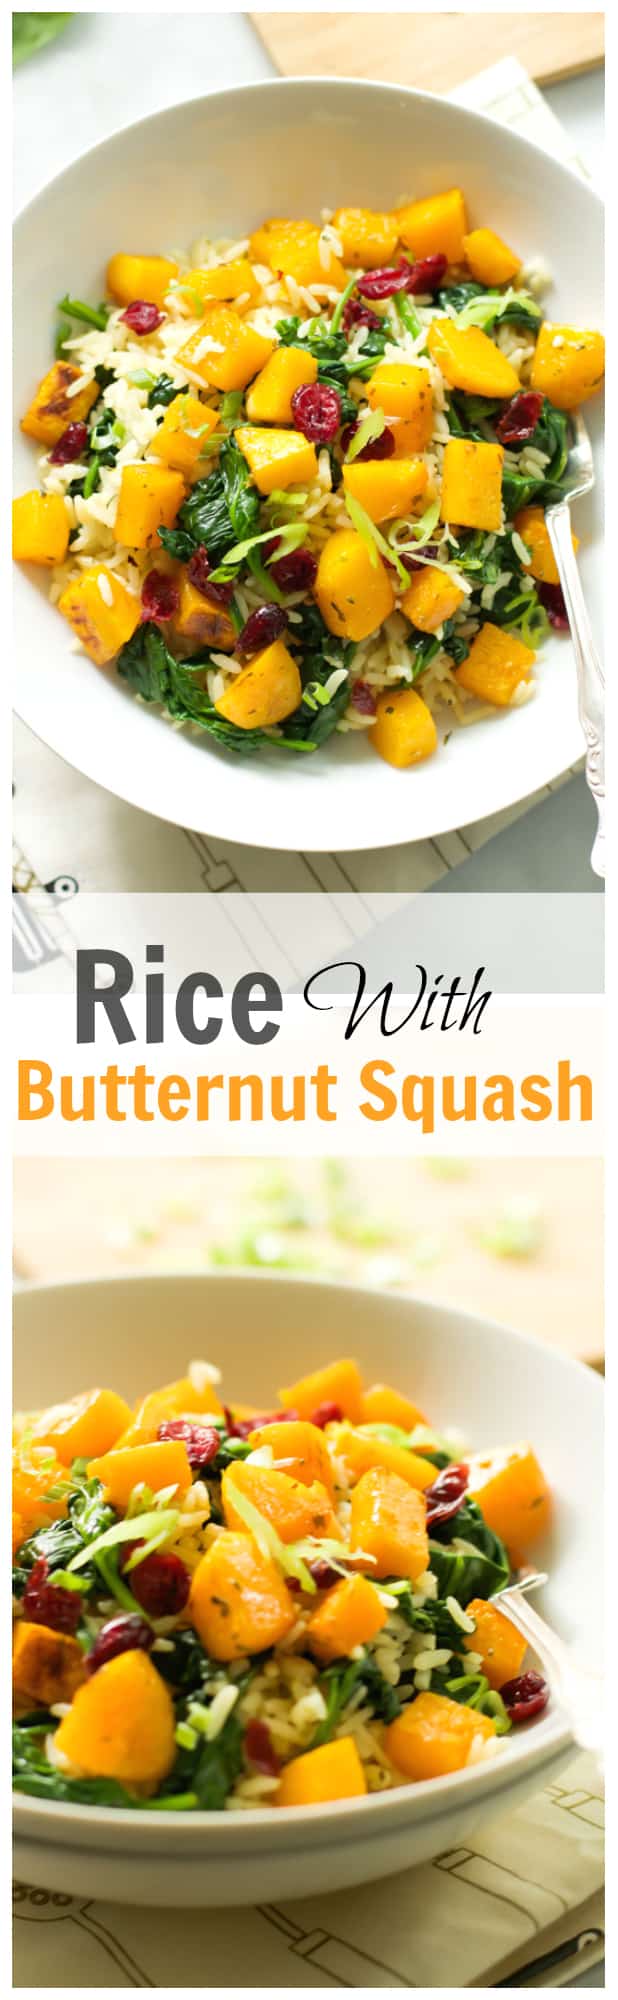 Rice with Butternut Squash